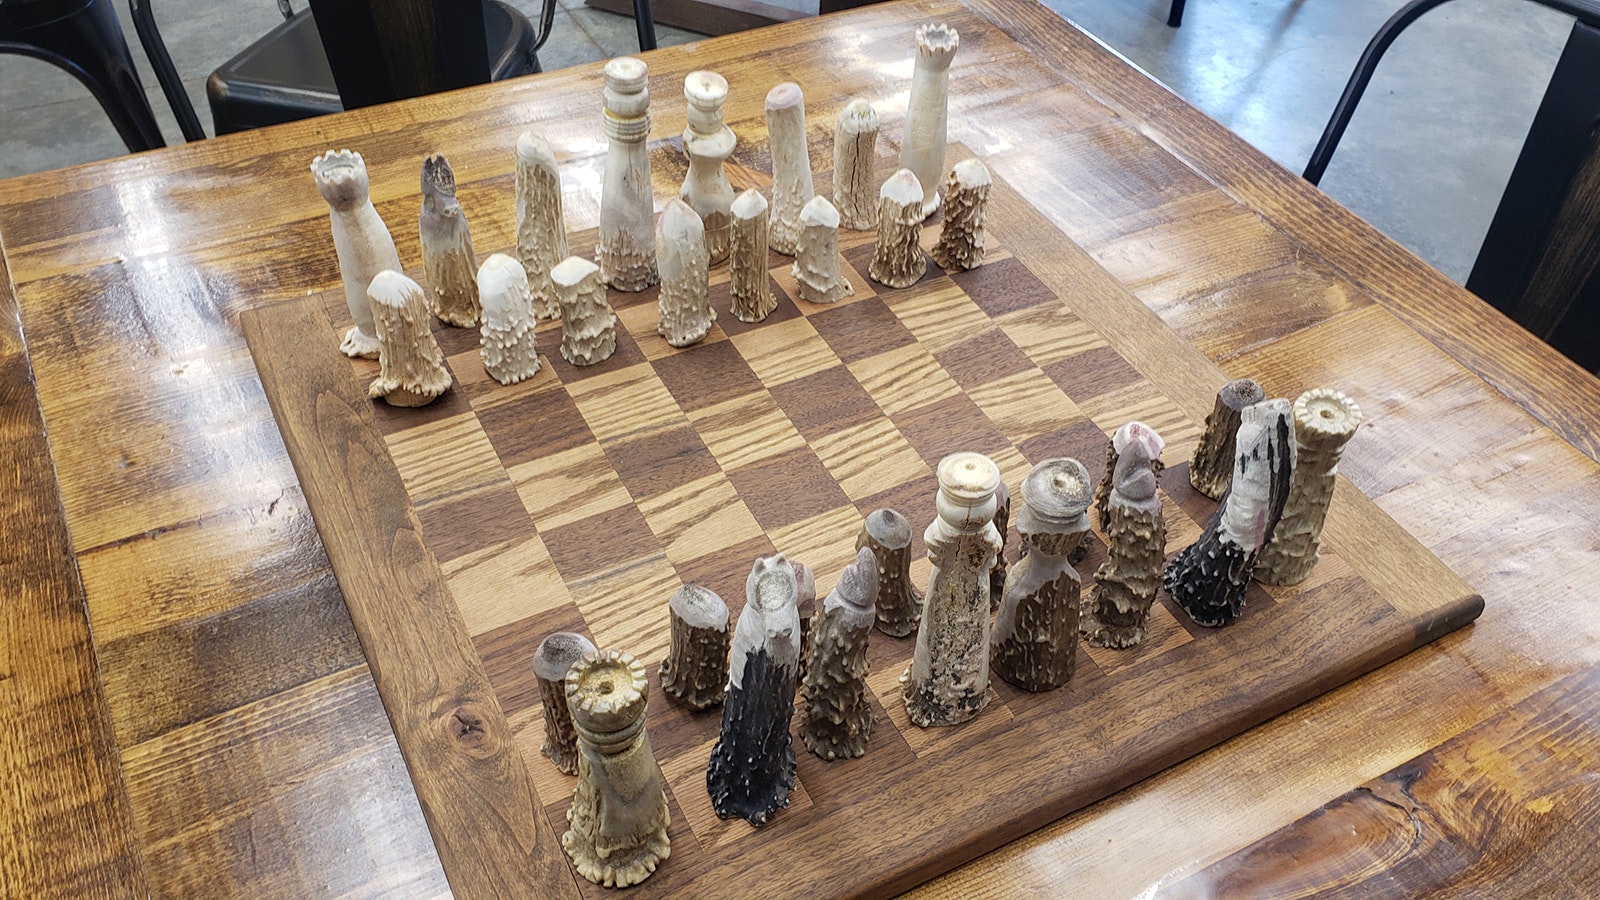 A handmade chess set is among the games available to pay in the Hulett Hardware Store's new coffee shop, Sego Lily.